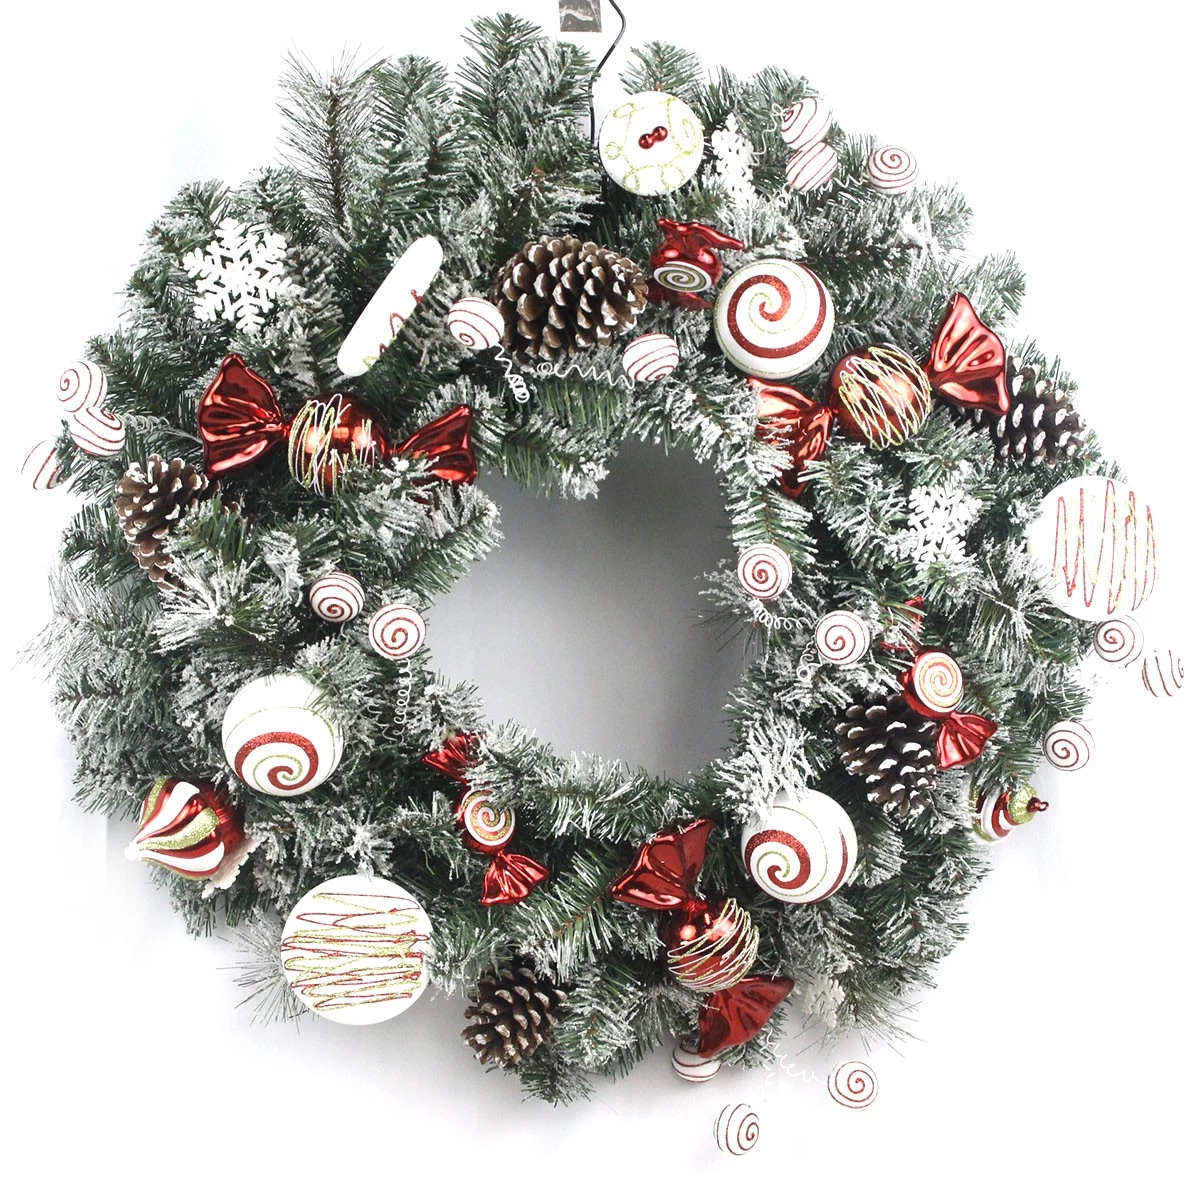 China Senmasine xmas wreaths for Christmas party hanging decoration mixed candy balls pinecone Berry poinsettia manufacturer